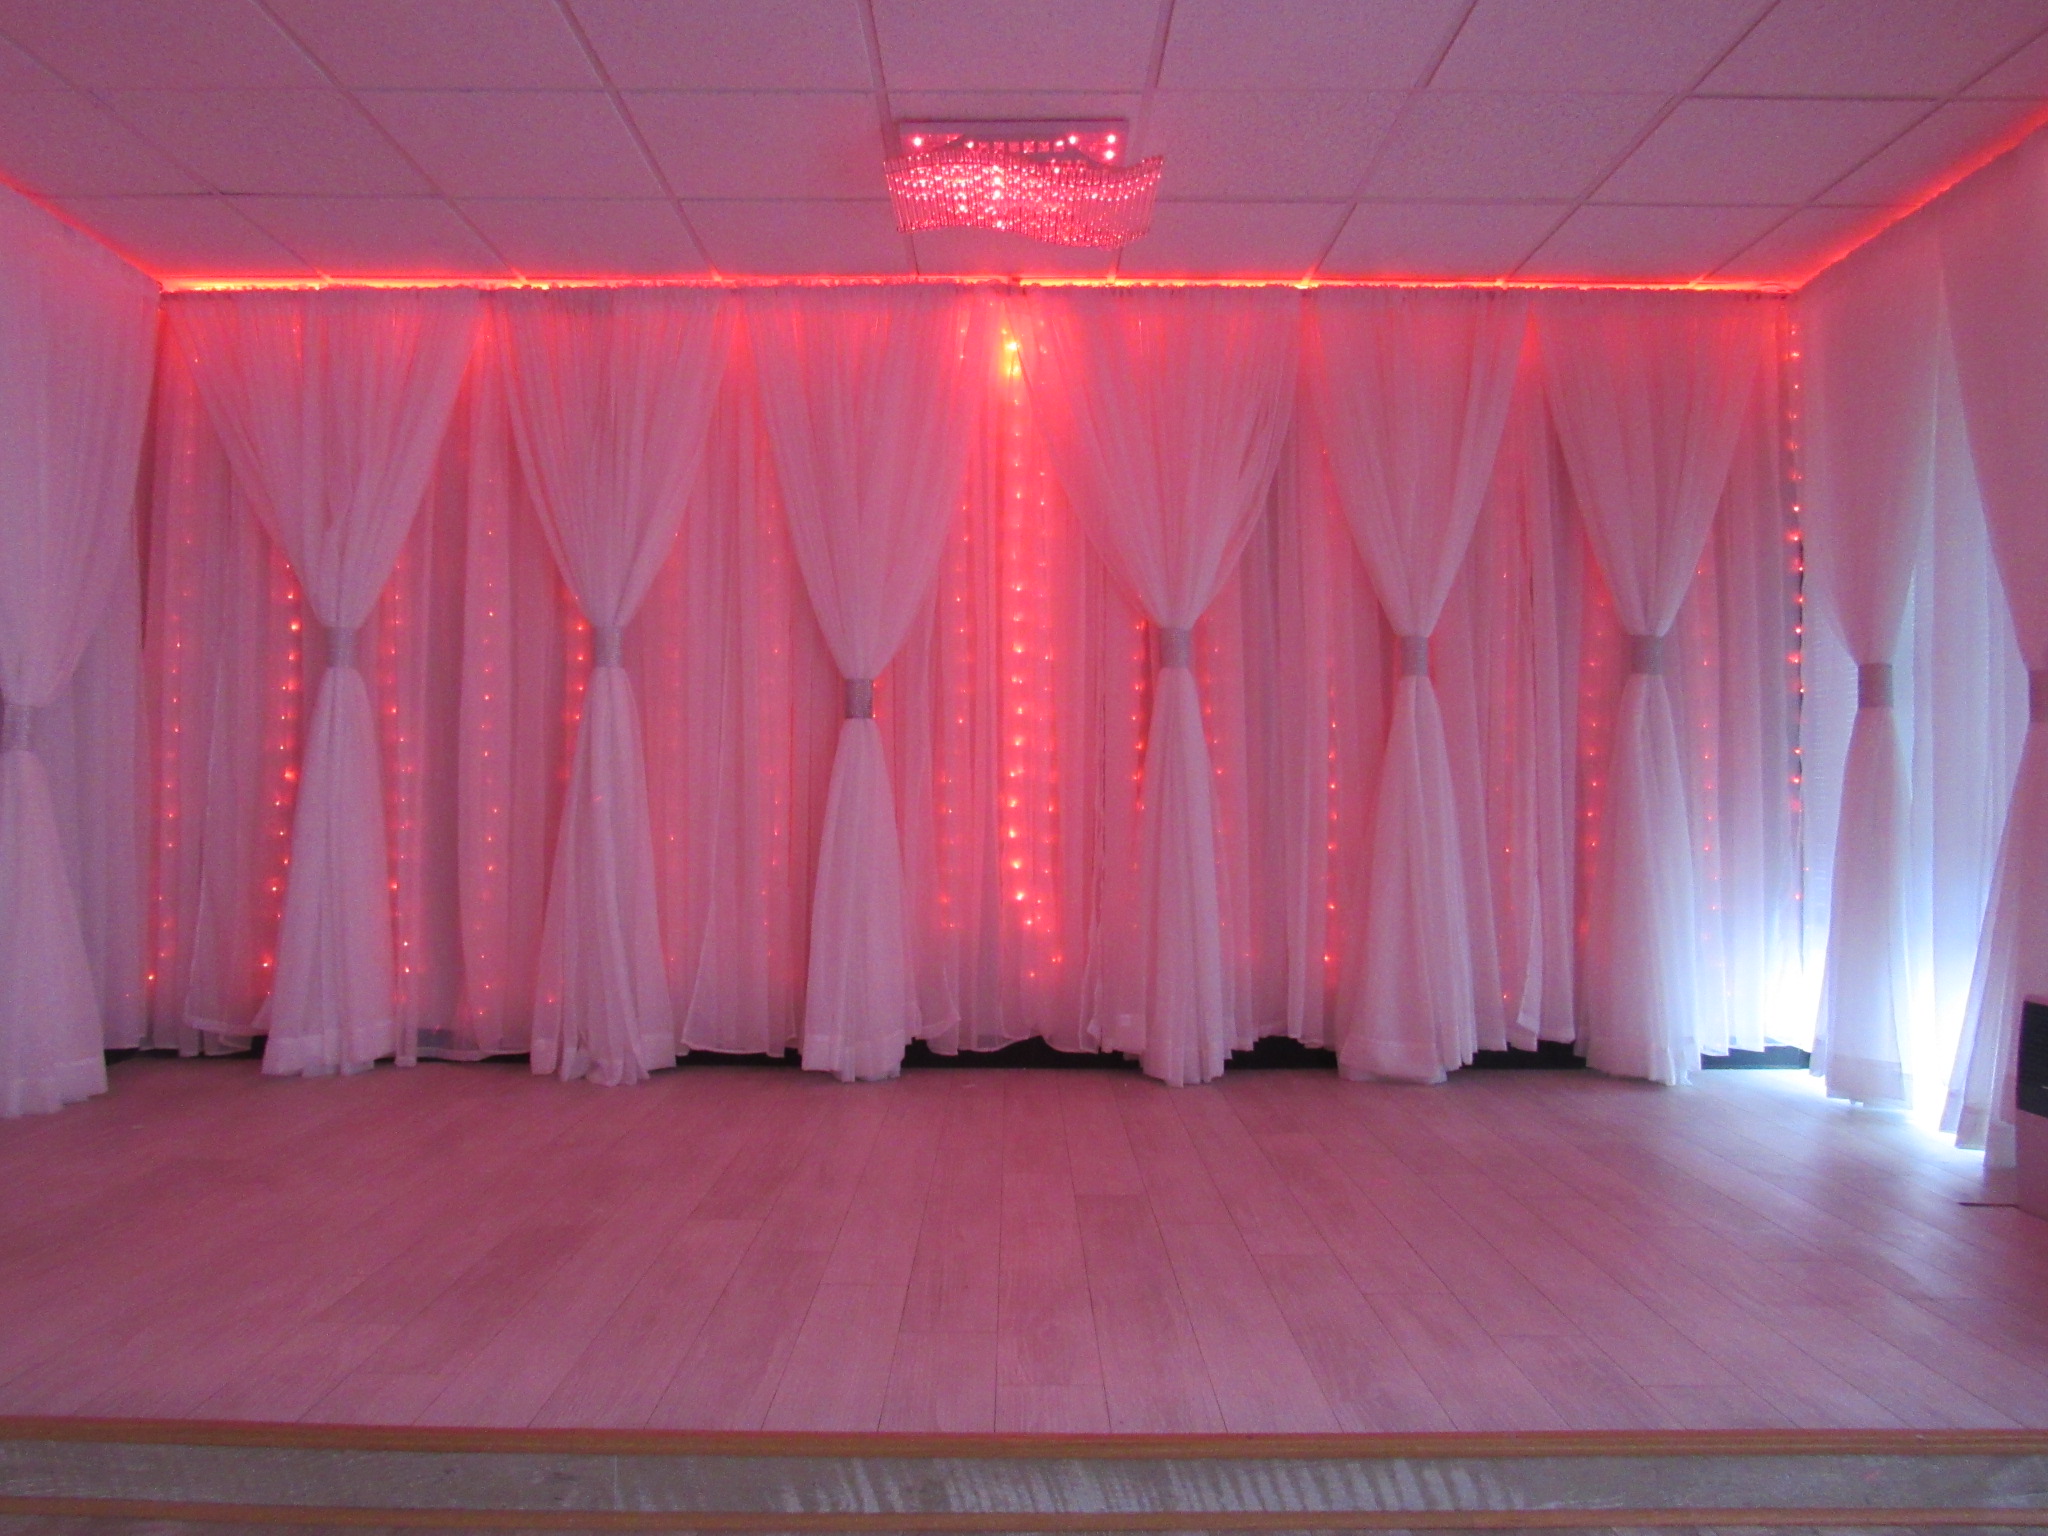 A warmly lit room with pink and red lights draped across sheer white curtains, highlighting an elegant wooden floor and a crystalline chandelier above.